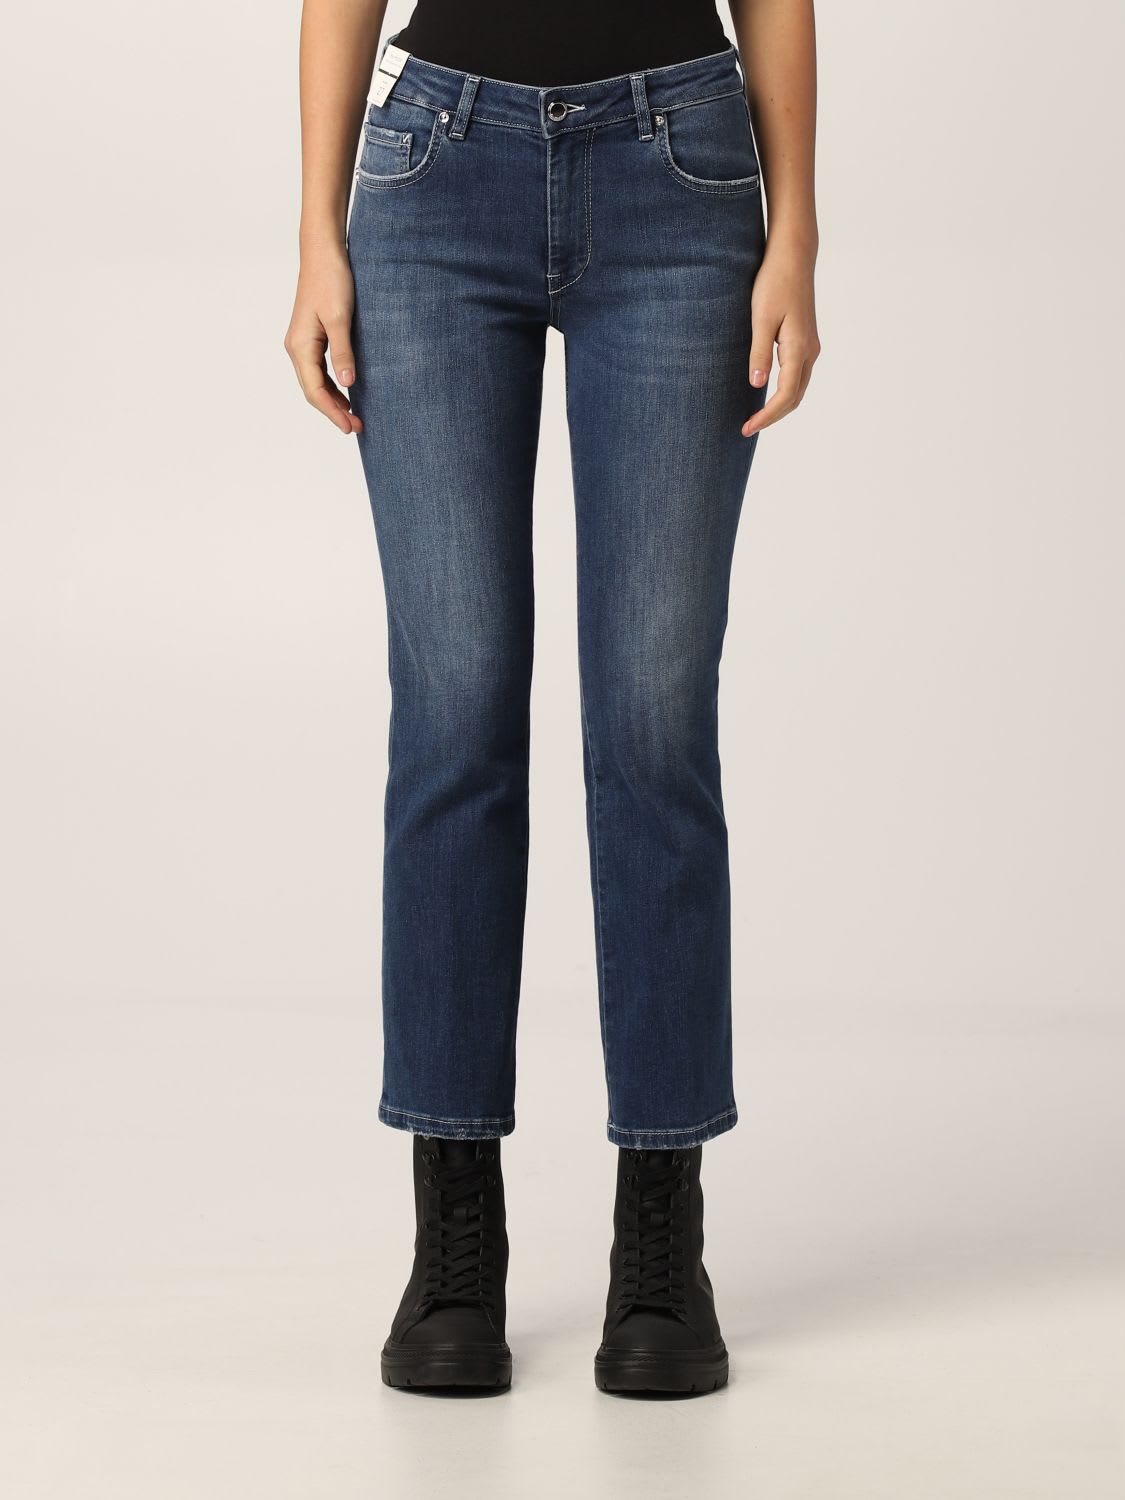 Re-hash Jeans Monica-z Re-hash Jeans In Washed Denim